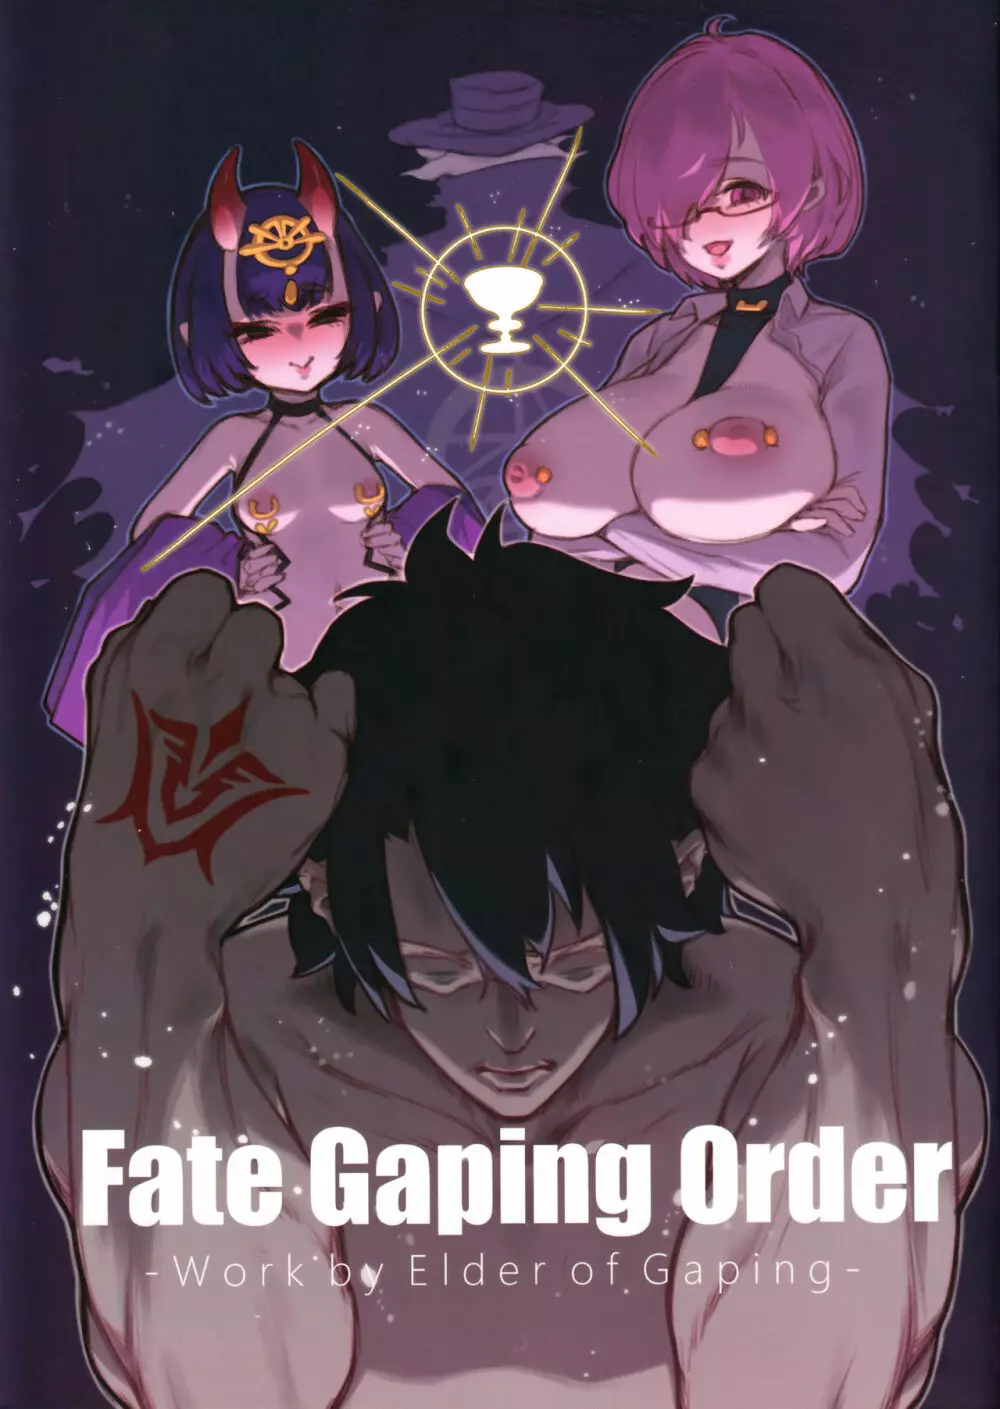 Fate Gaping Order - Work by Elder of Gaping - - page1